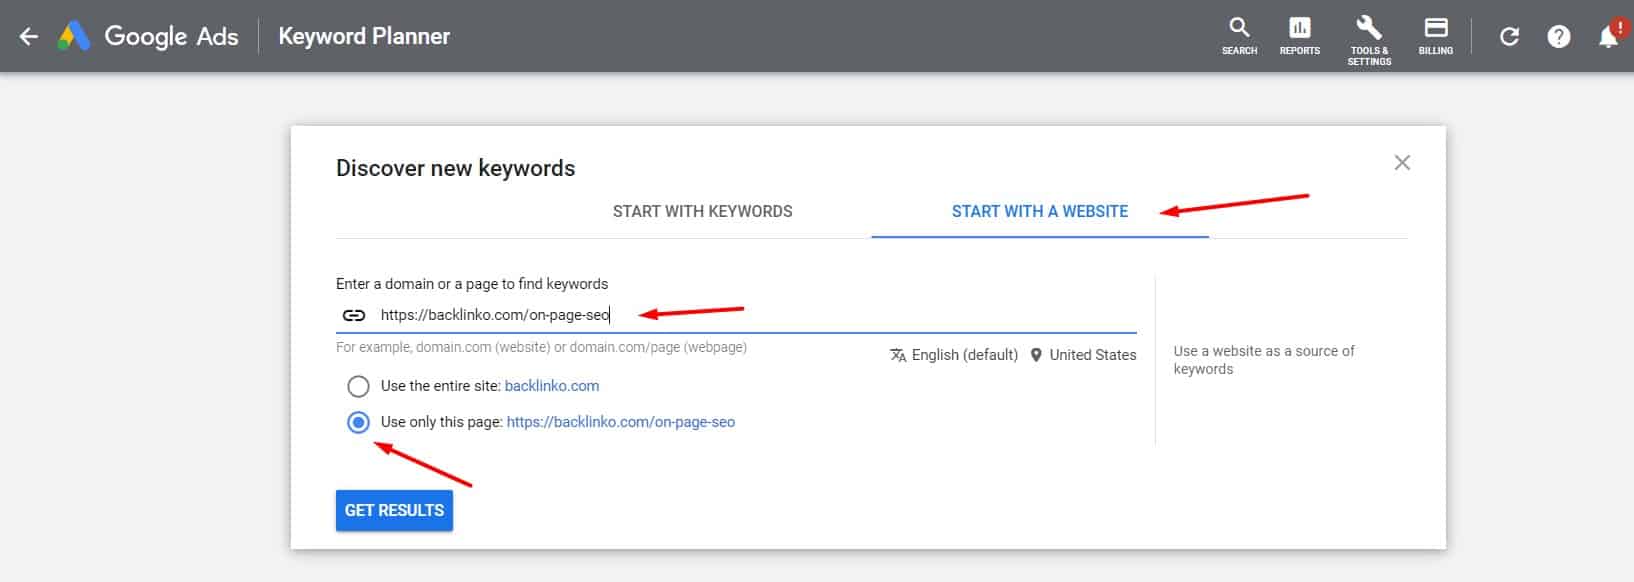 start with a website google keyword planner to discover new LSI keywords